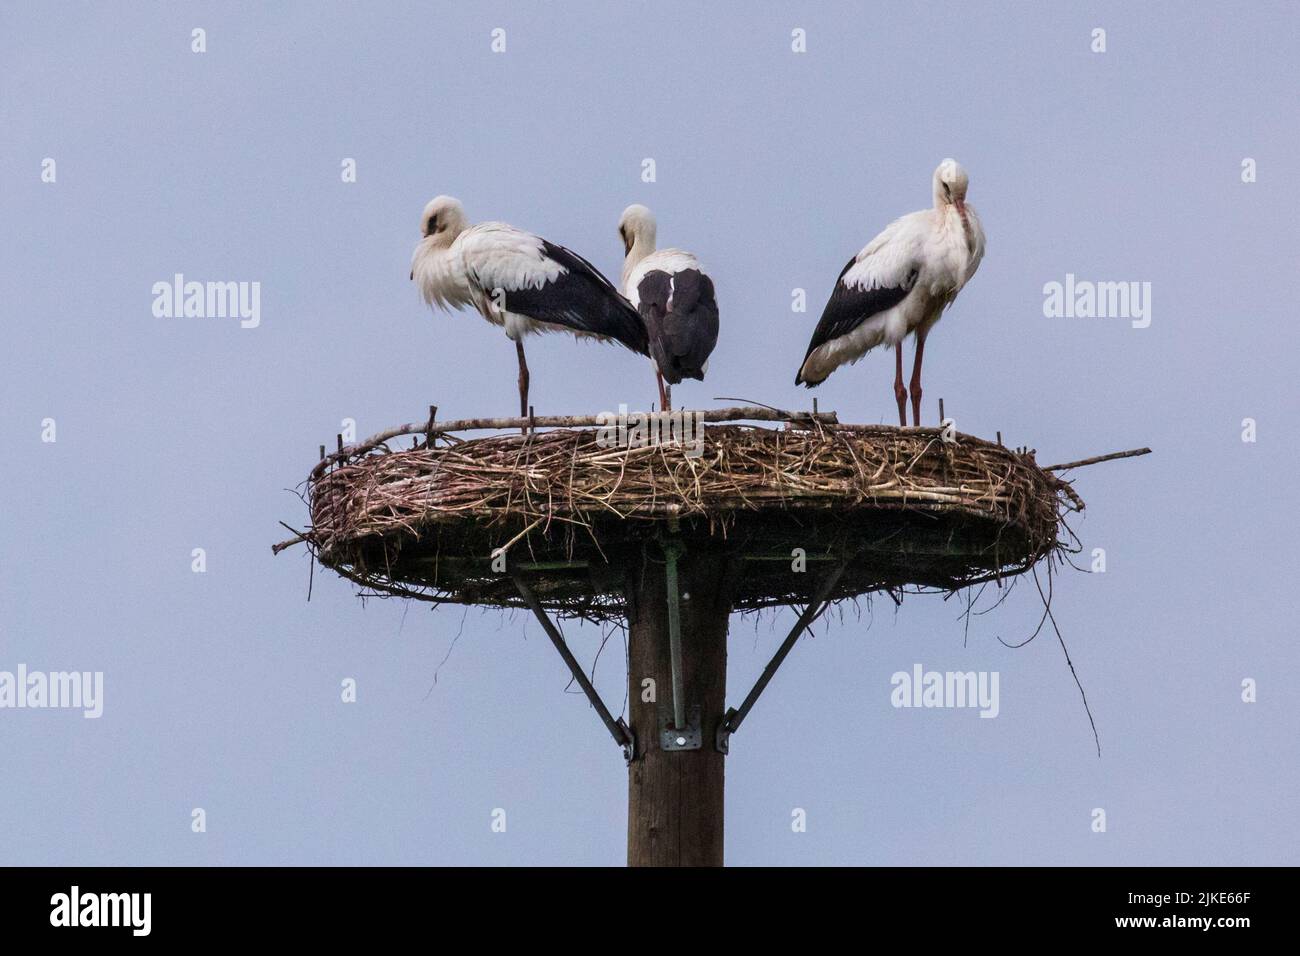 Dülmen, Münsterland, NRW, Germany. 1st Aug, 2022. The female with her two juveniles. A family of two adult white storks (Ciconia ciconia) with their two circa four months old juveniles, get ready to leave their nesting site before they will join a flock to start the long journey South for their winter migration in a few weeks. Both juveniles are now large enough to join their parents on daily flights and foraging trips in the area. Credit: Imageplotter/Alamy Live News Stock Photo